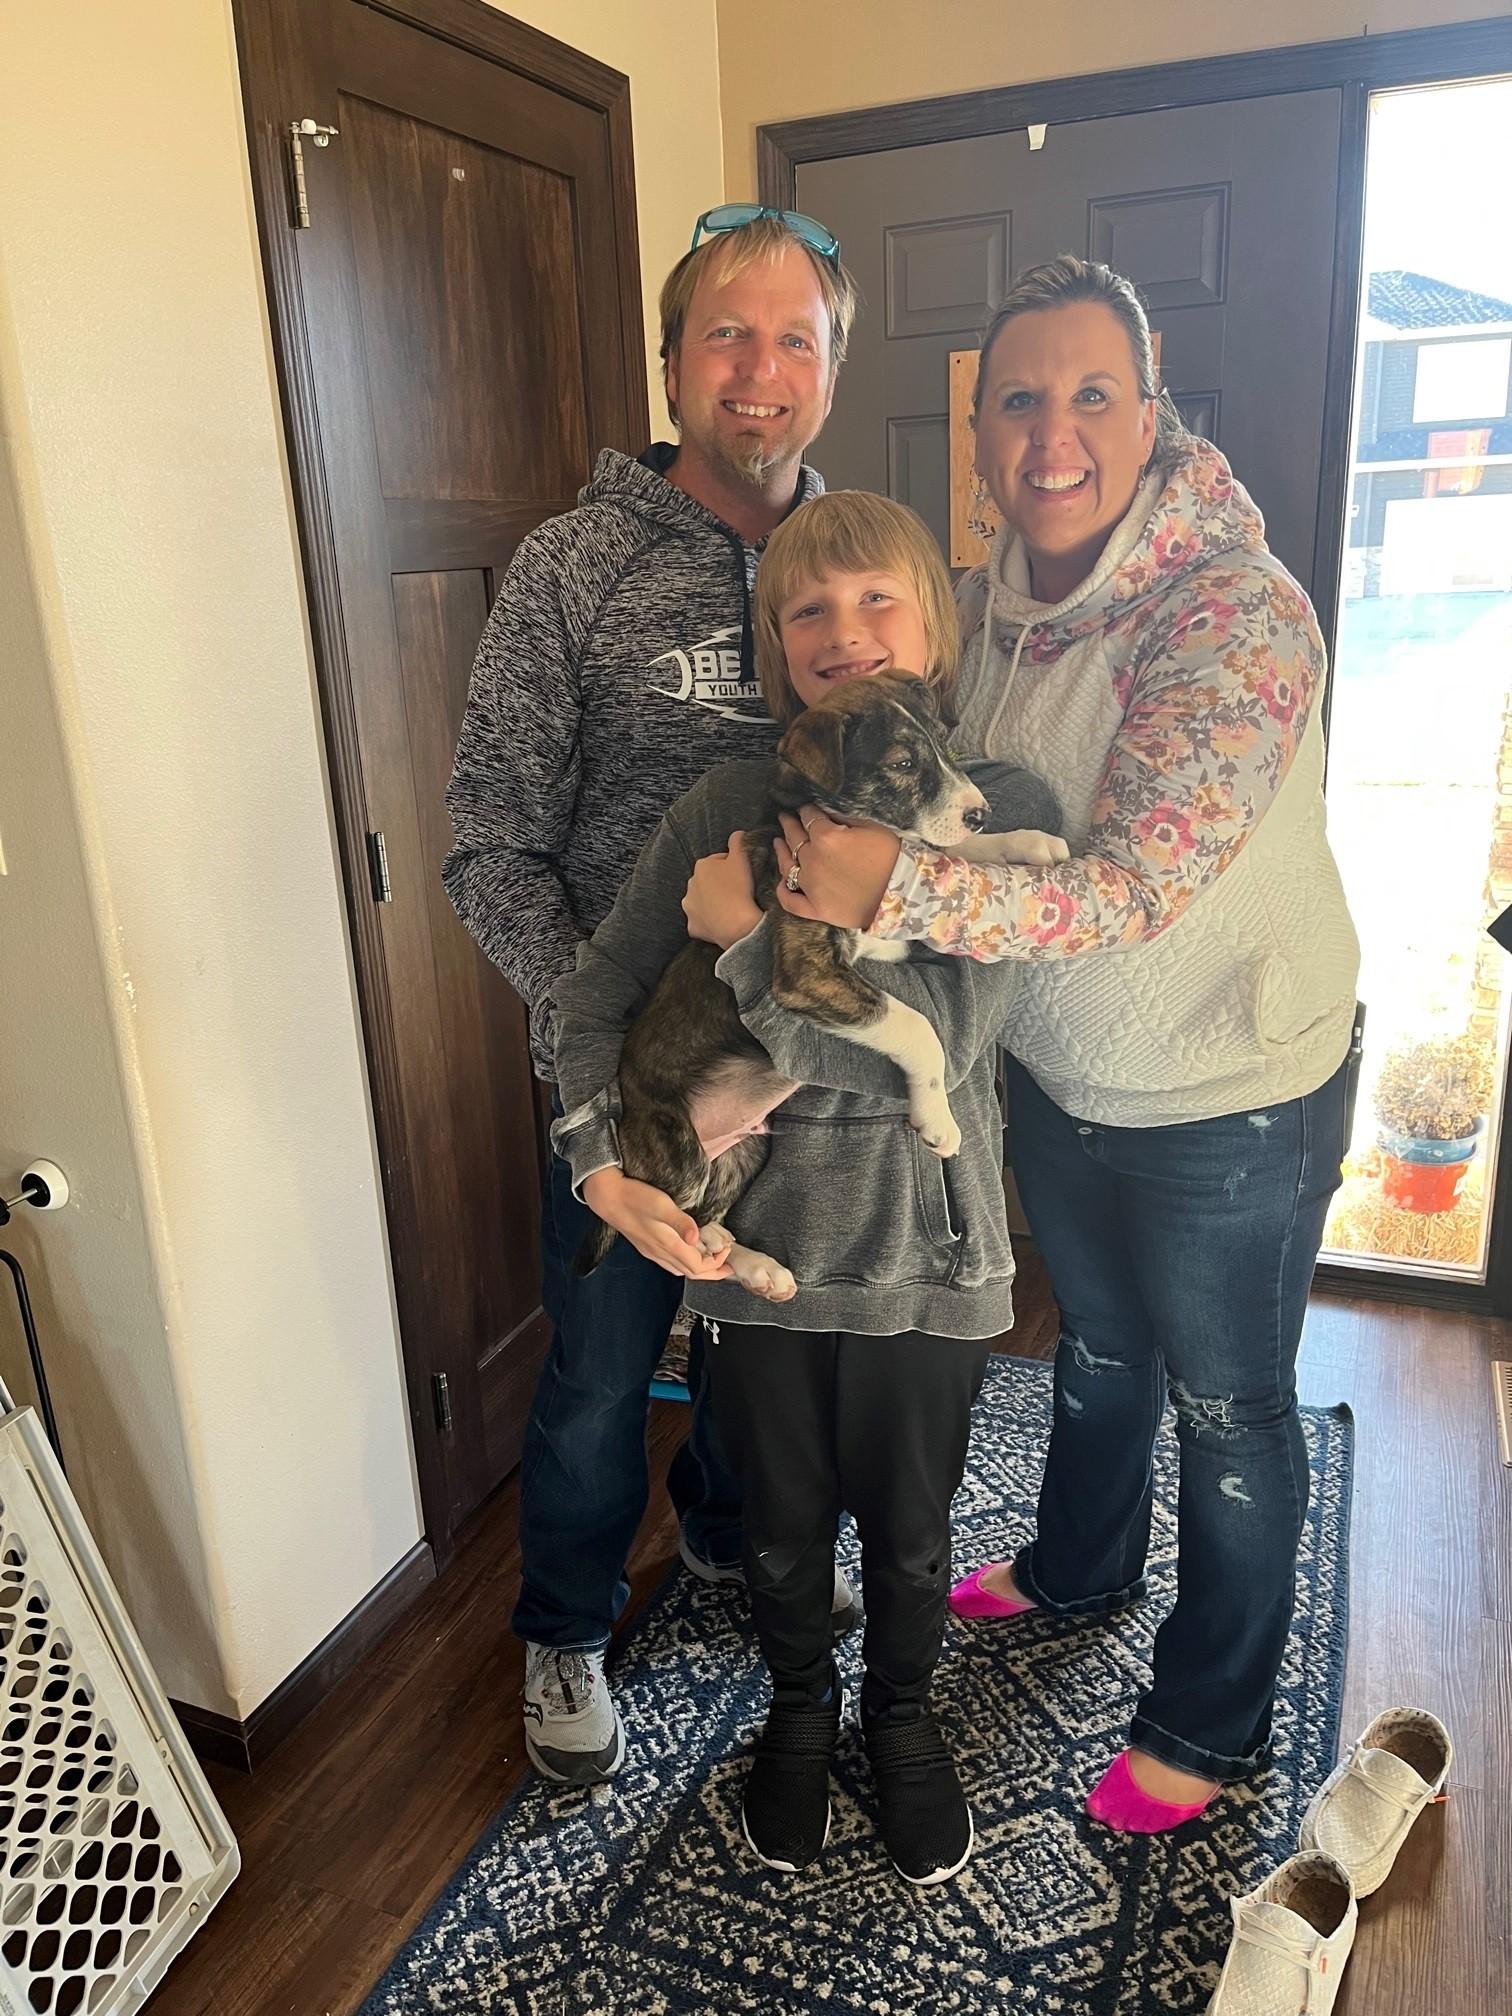 A family consisting of a father, mother, and child pose together in a home's entryway. They are smiling widely, and the child holds a small dog in his arms.